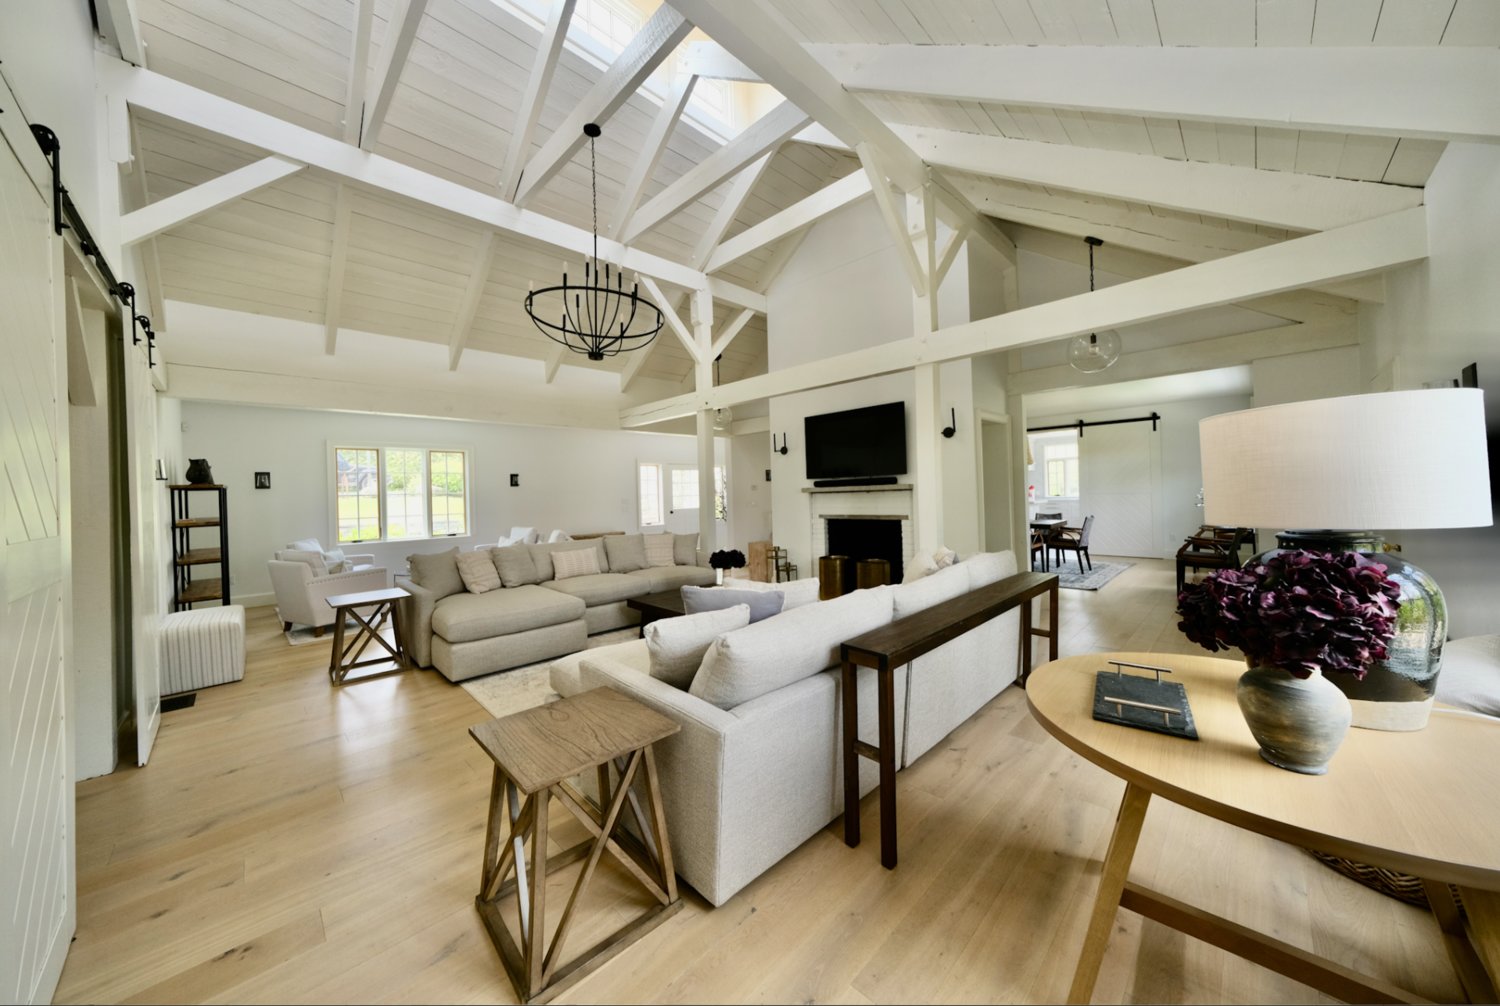 The living room has wood floors, an exposed-beam ceiling and a double-sided fireplace.